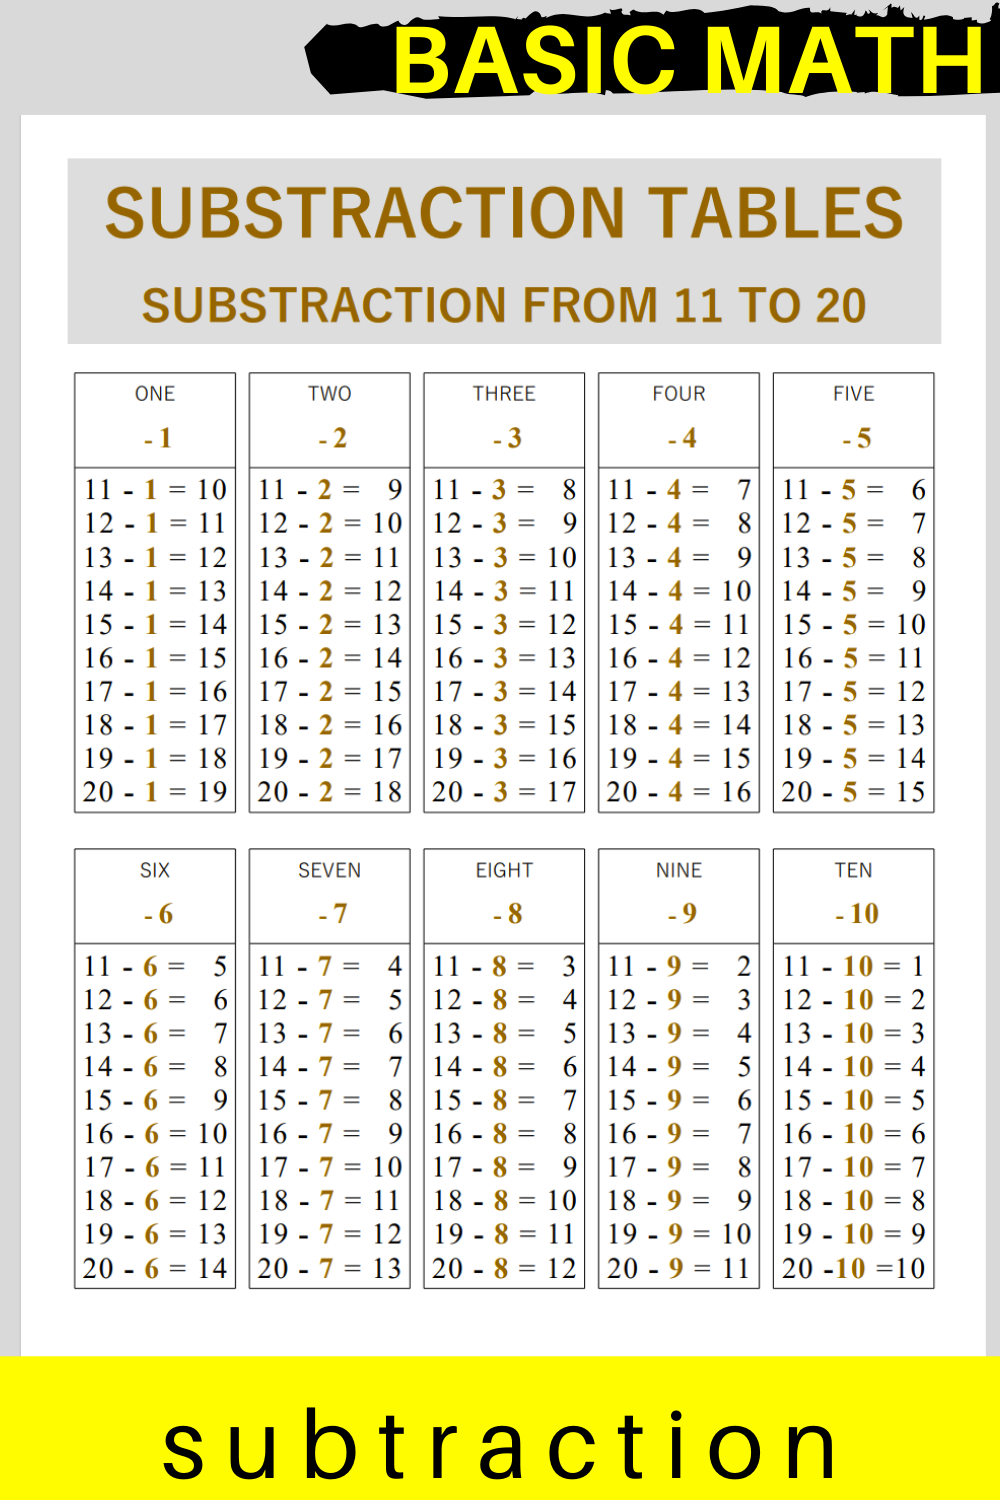 Subtraction Tables Printable Numbers 11 To 20 Subtraction Subtraction Worksheets Printable Numbers